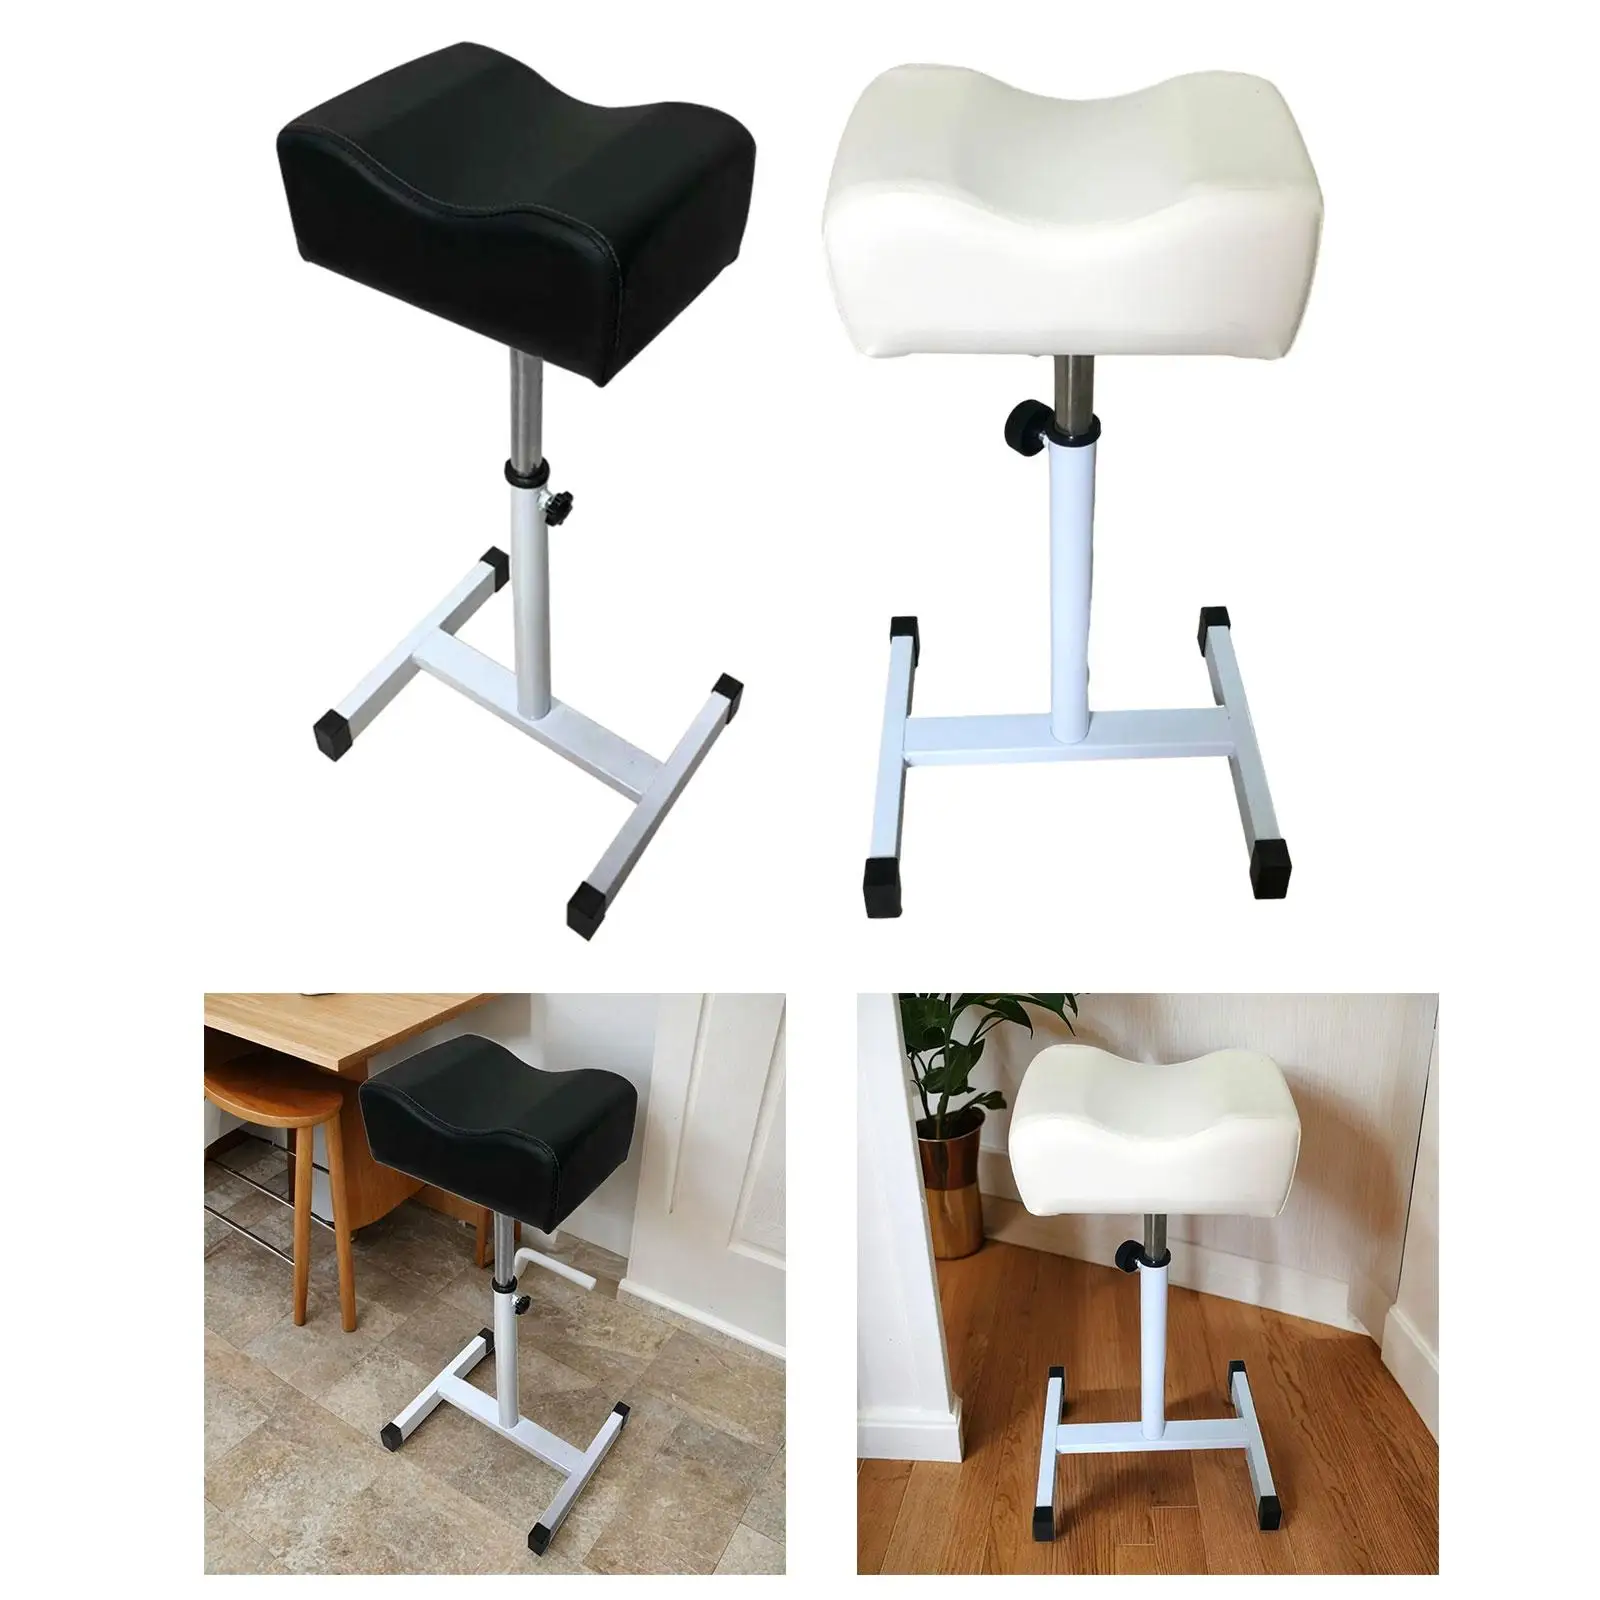 Pedicure Manicure Footrest Sturdy Pedicure Nail Equipment Adjustable Height for Commercial Use Pedicure Beauty SPA Salon